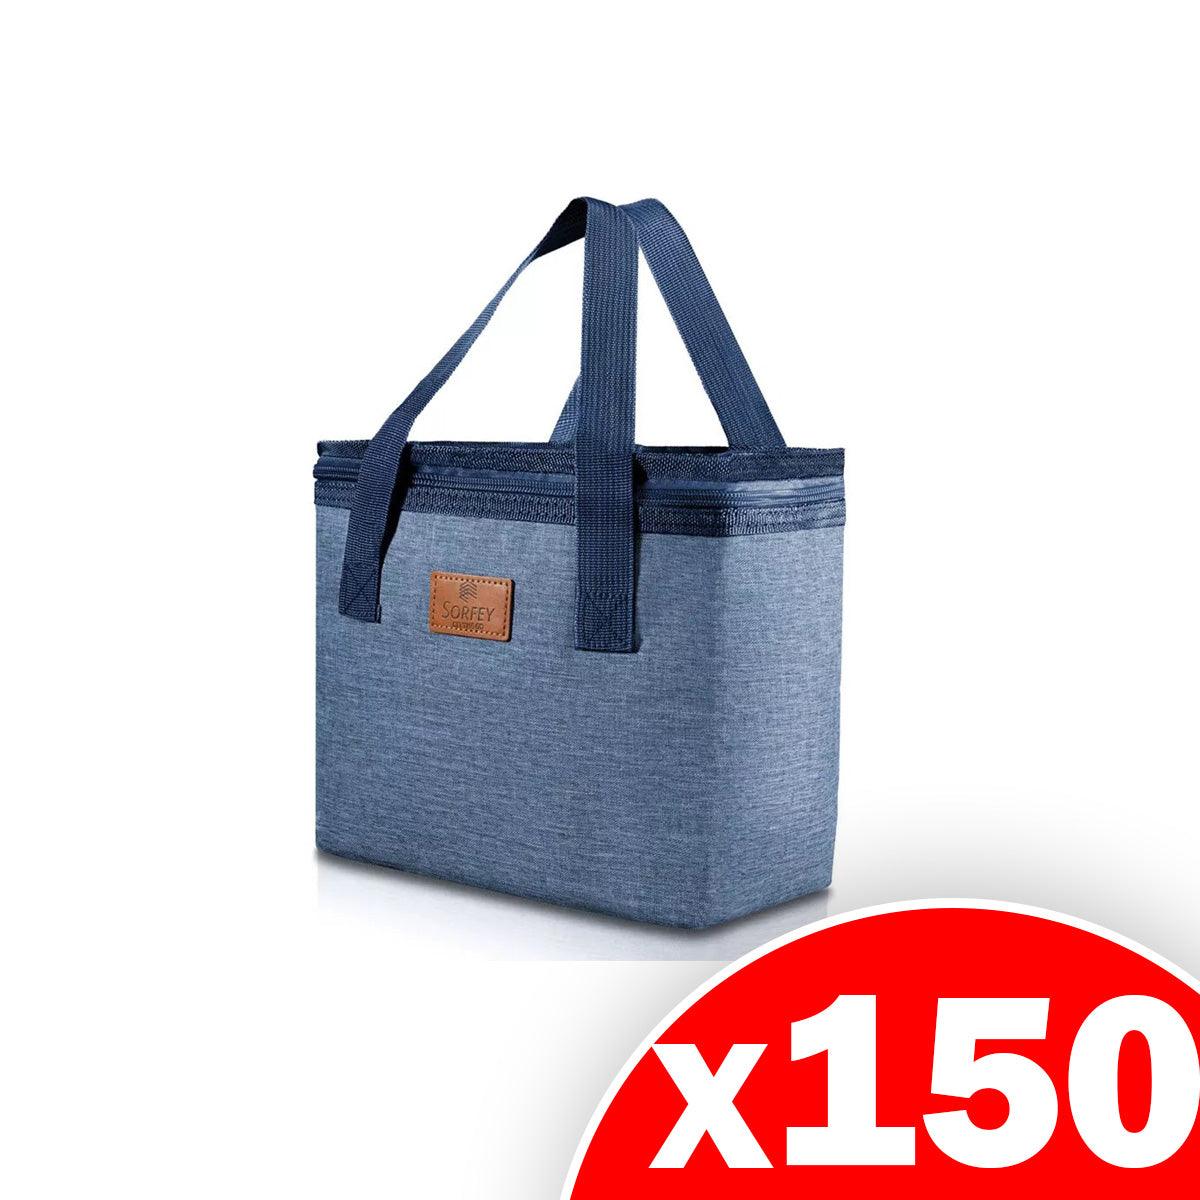 Lunch Bag, Insulated Cooler Lunch Bag, 8X4.5X7, Blue, 150 Pack